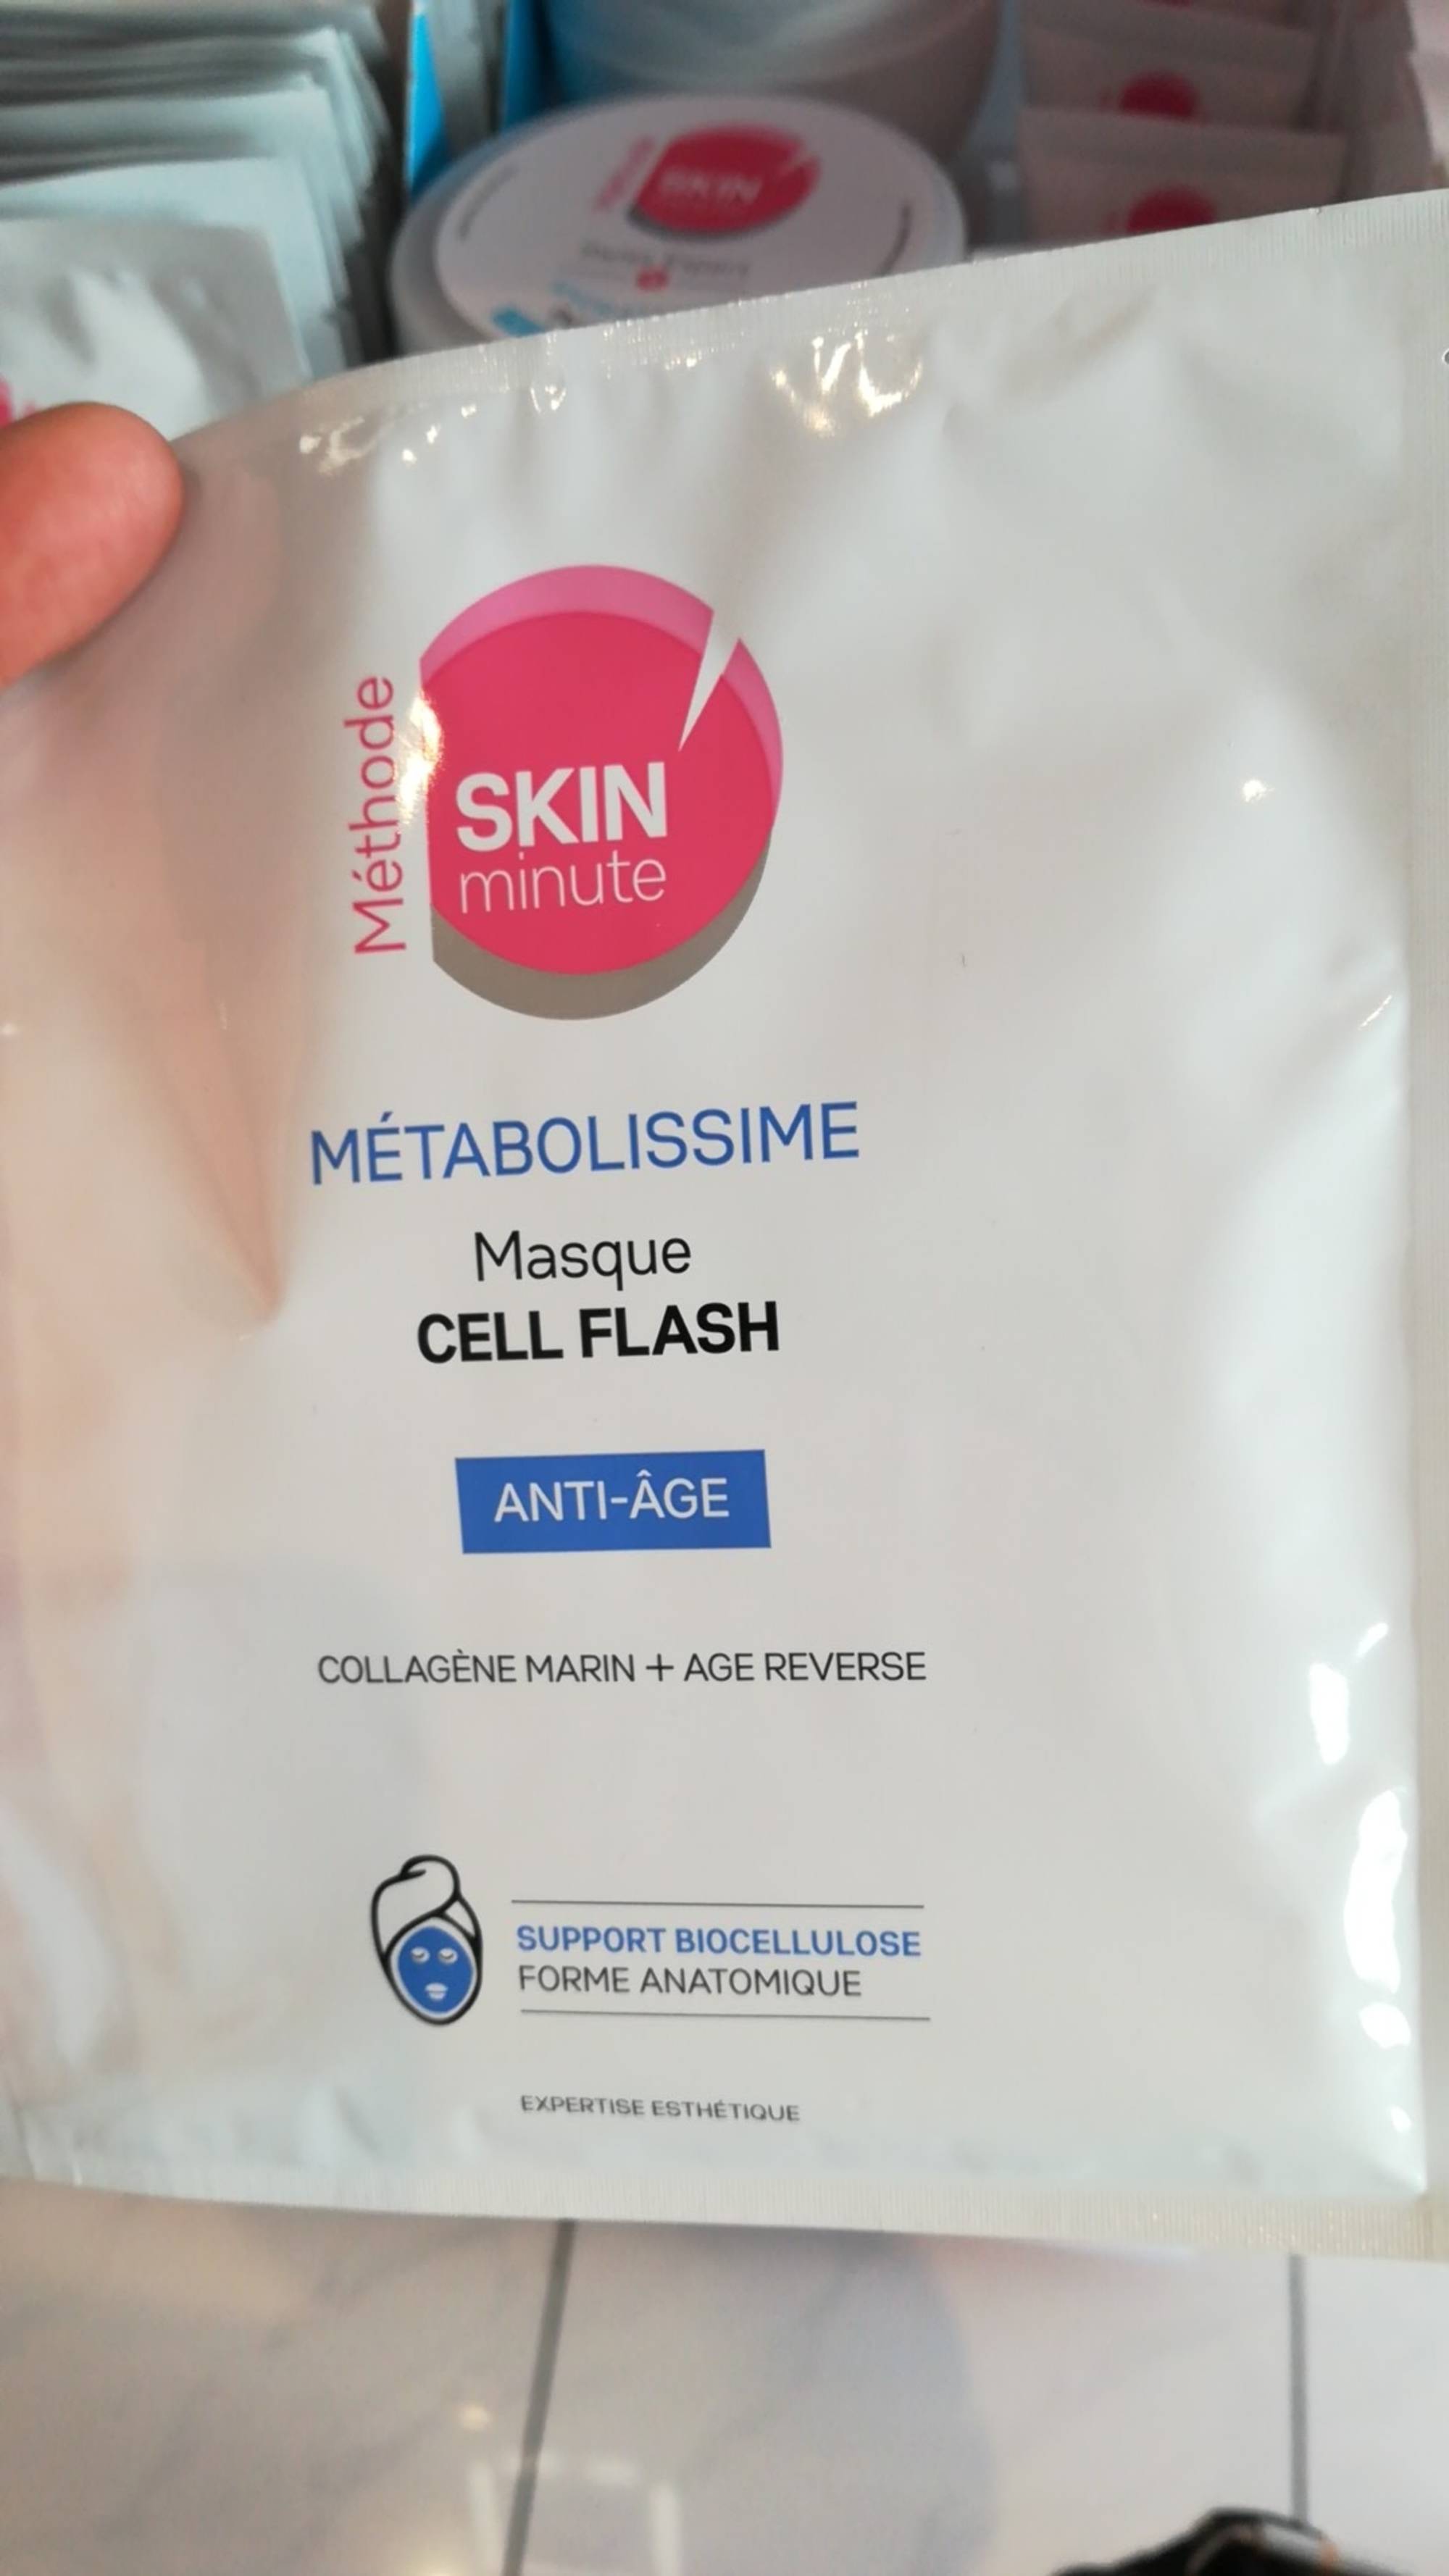 BODY'MINUTE - Skin'minute métabolissime - Masque cell flash anti-âge